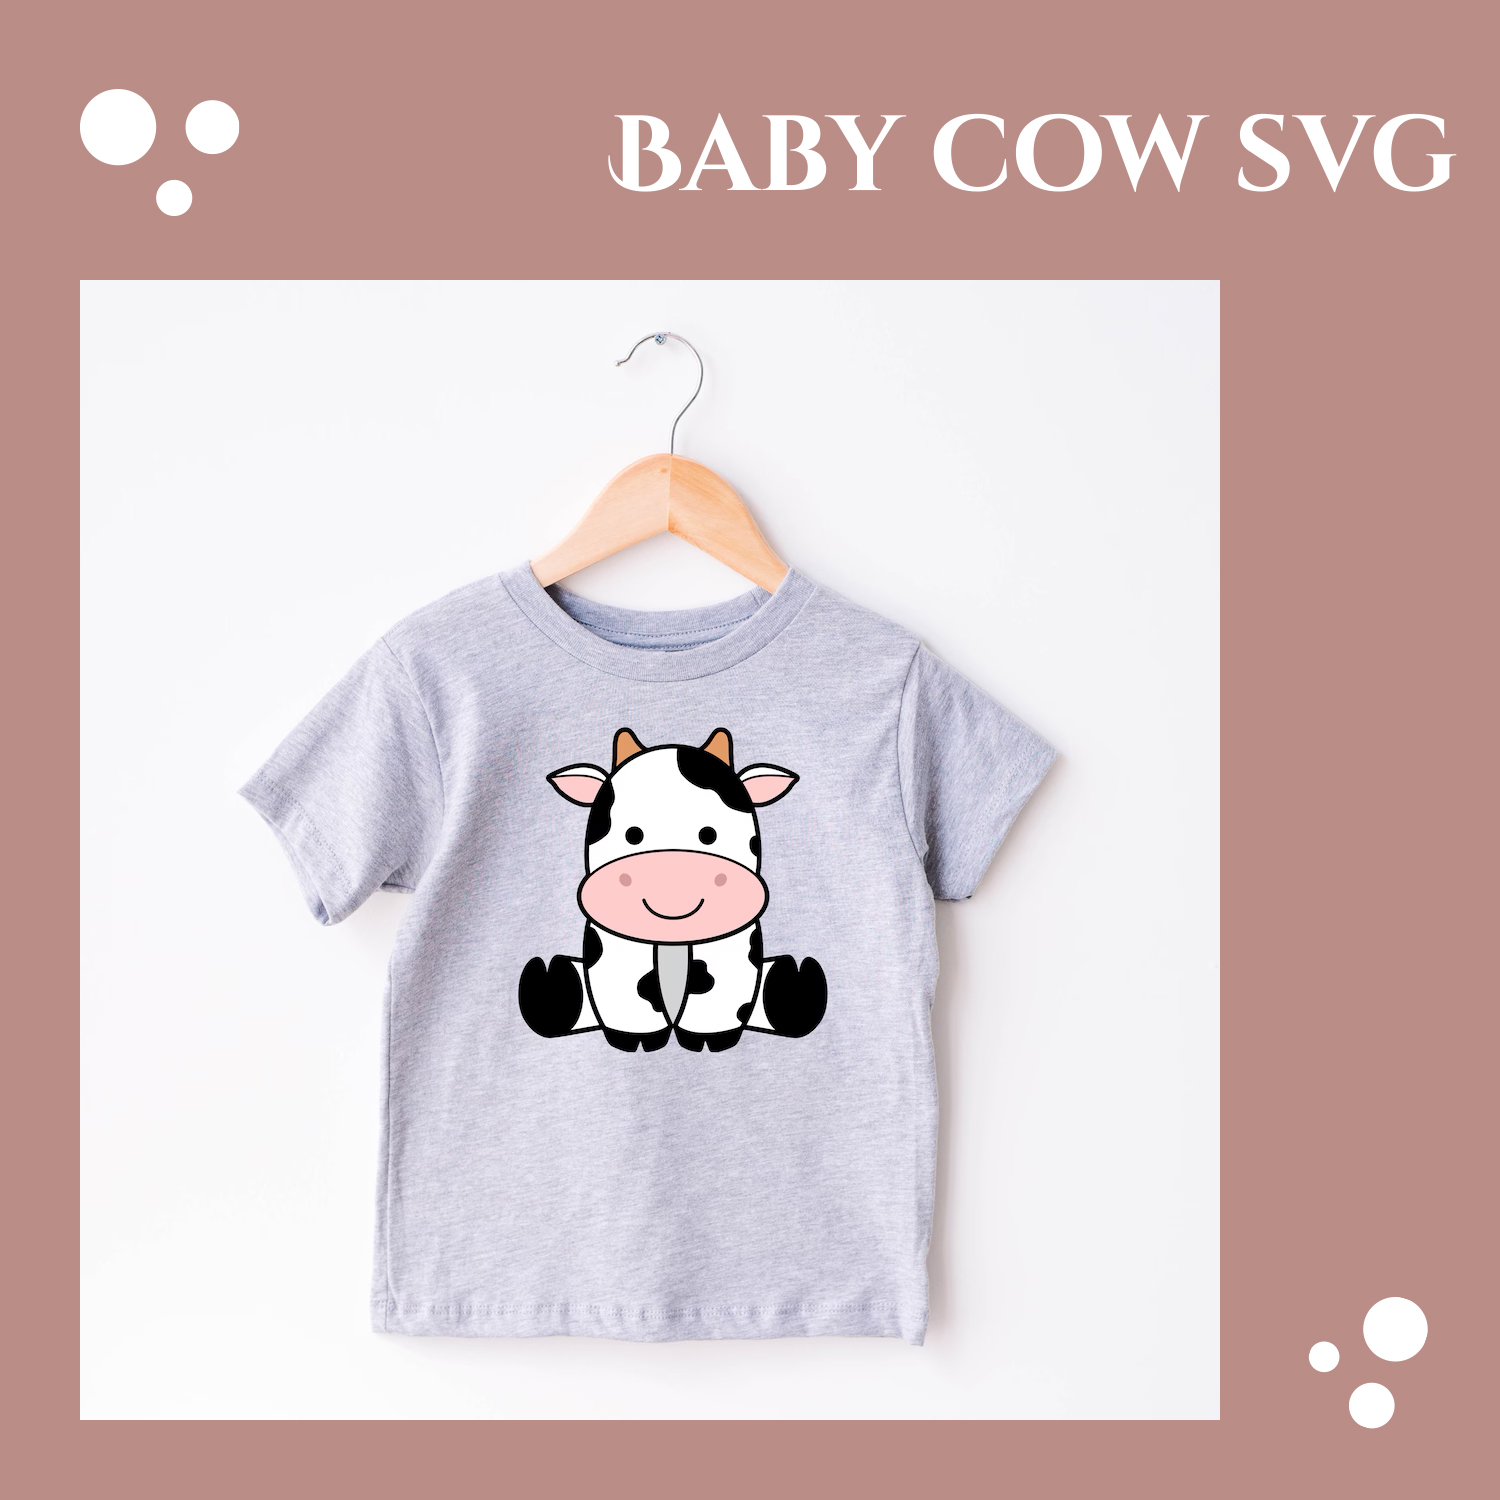 Baby cow t - shirt hanging on a hanger.